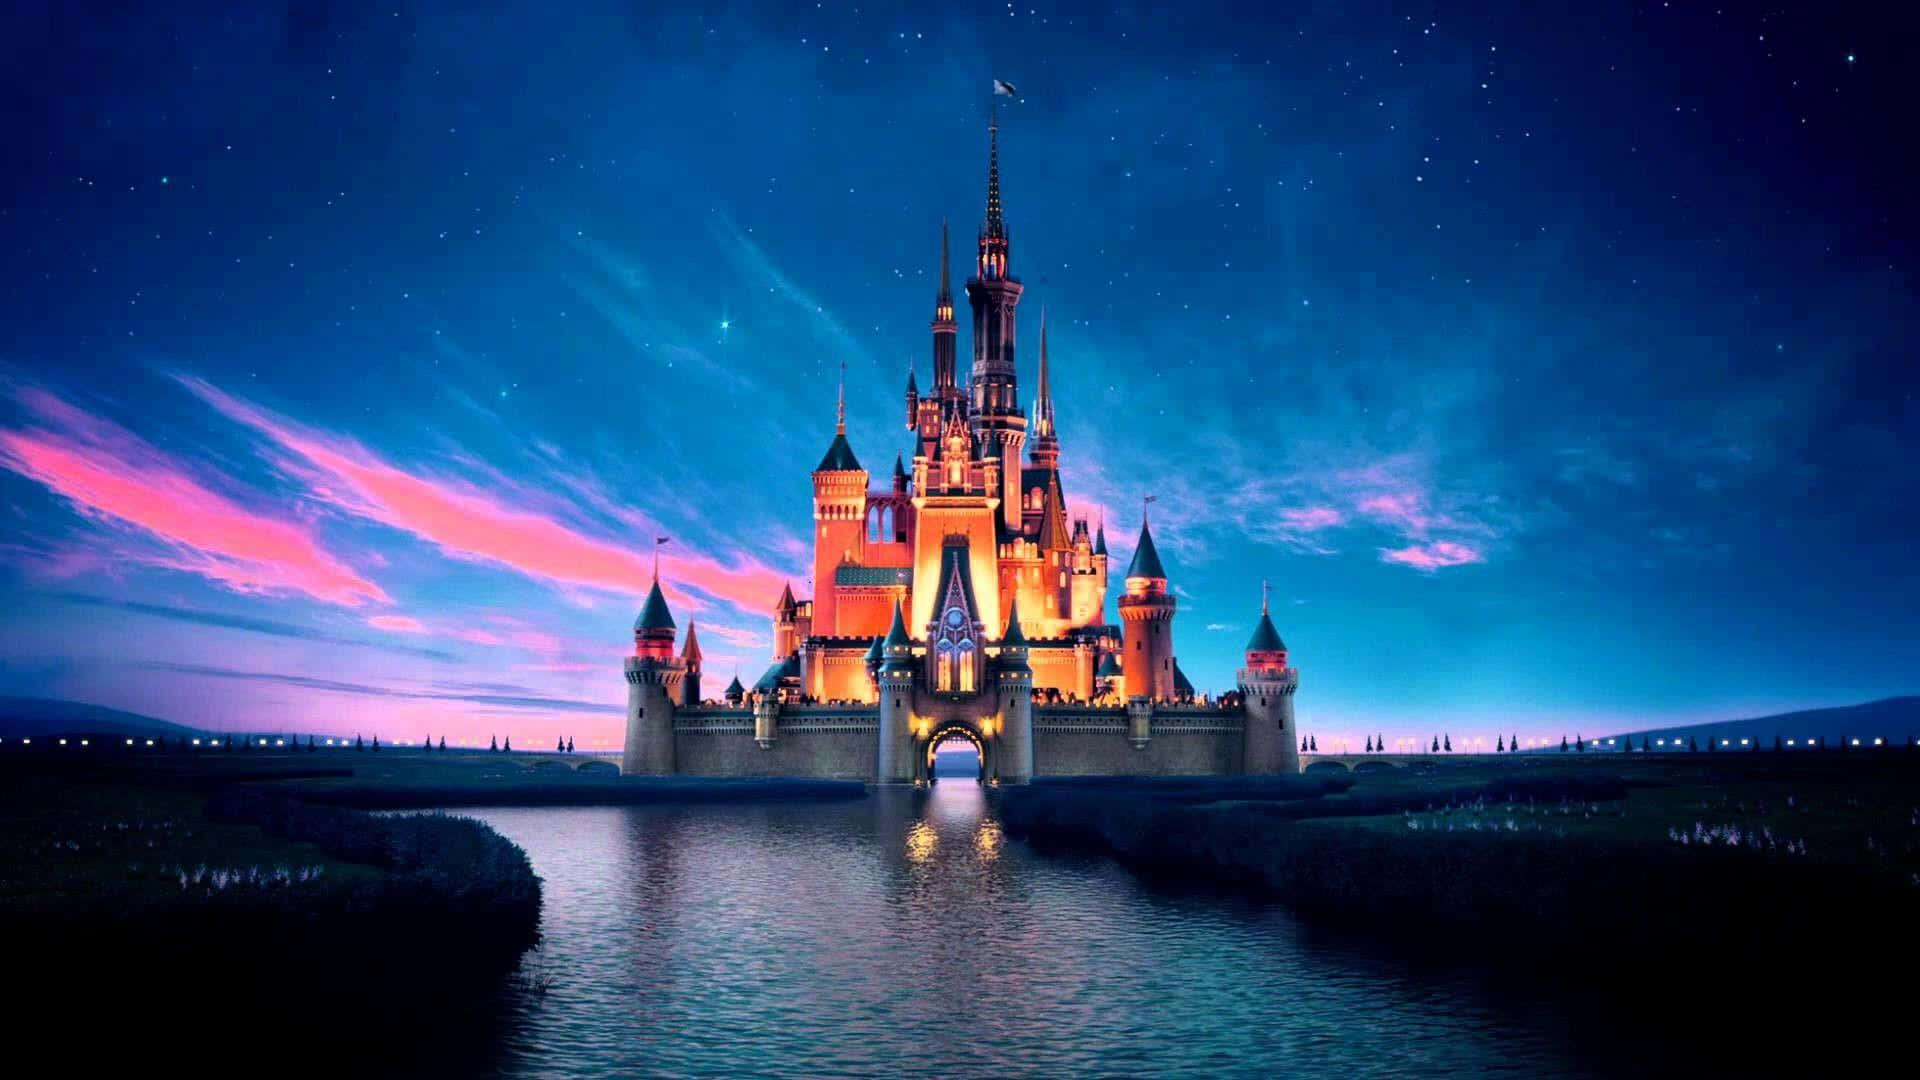 Get ready to explore a world of magical adventure at Disney World! Wallpaper